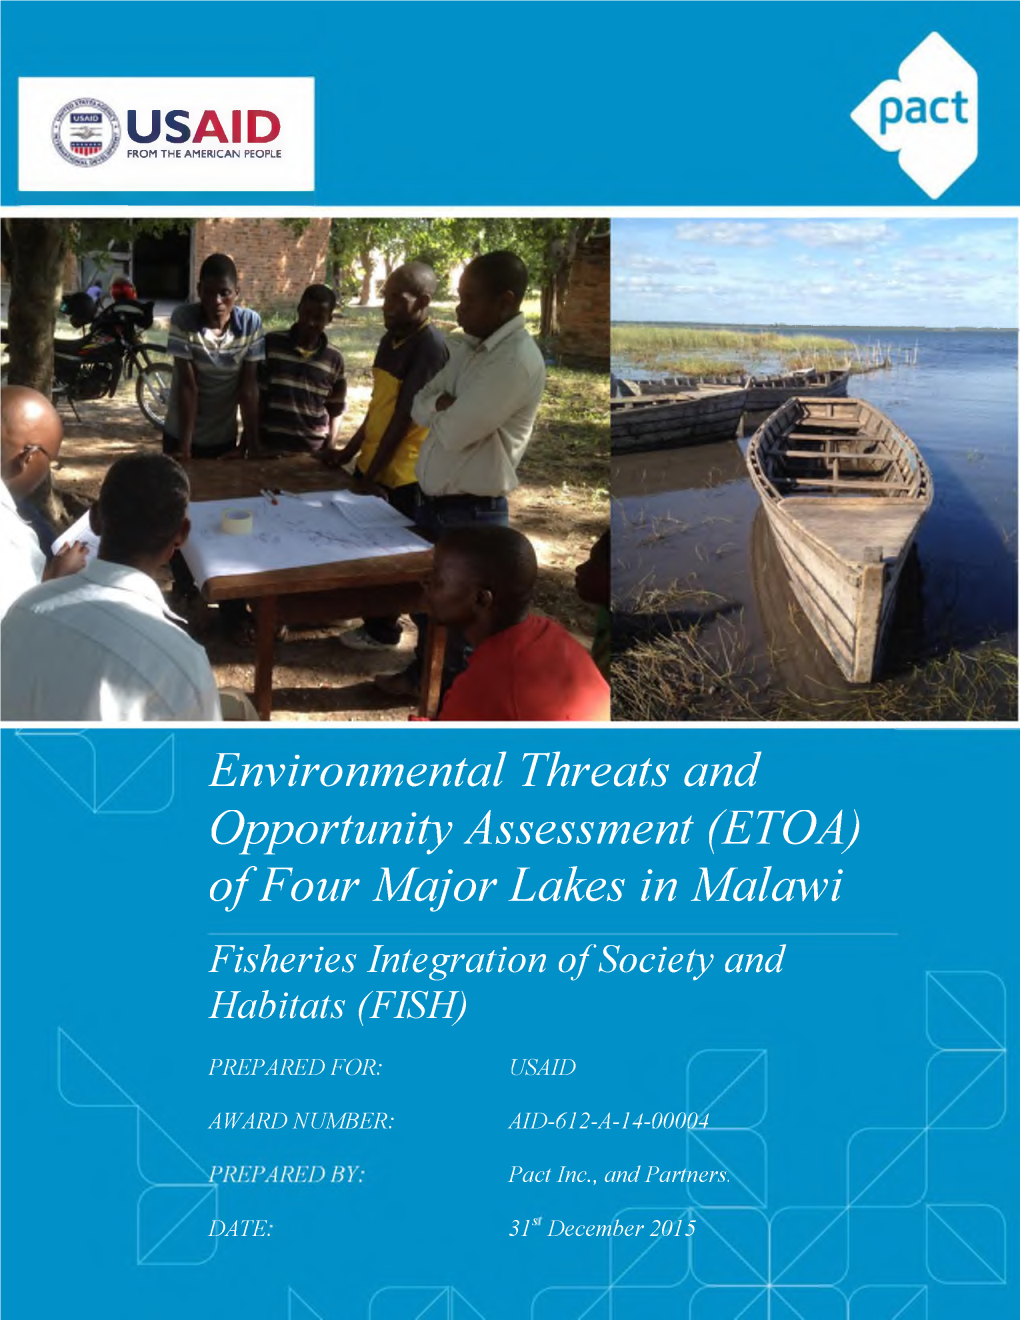 Environmental Threats and Opportunity Assessment (ETOA) of Four Major Lakes in Malawi Fisheries Integration of Society and Habitats (FISH)